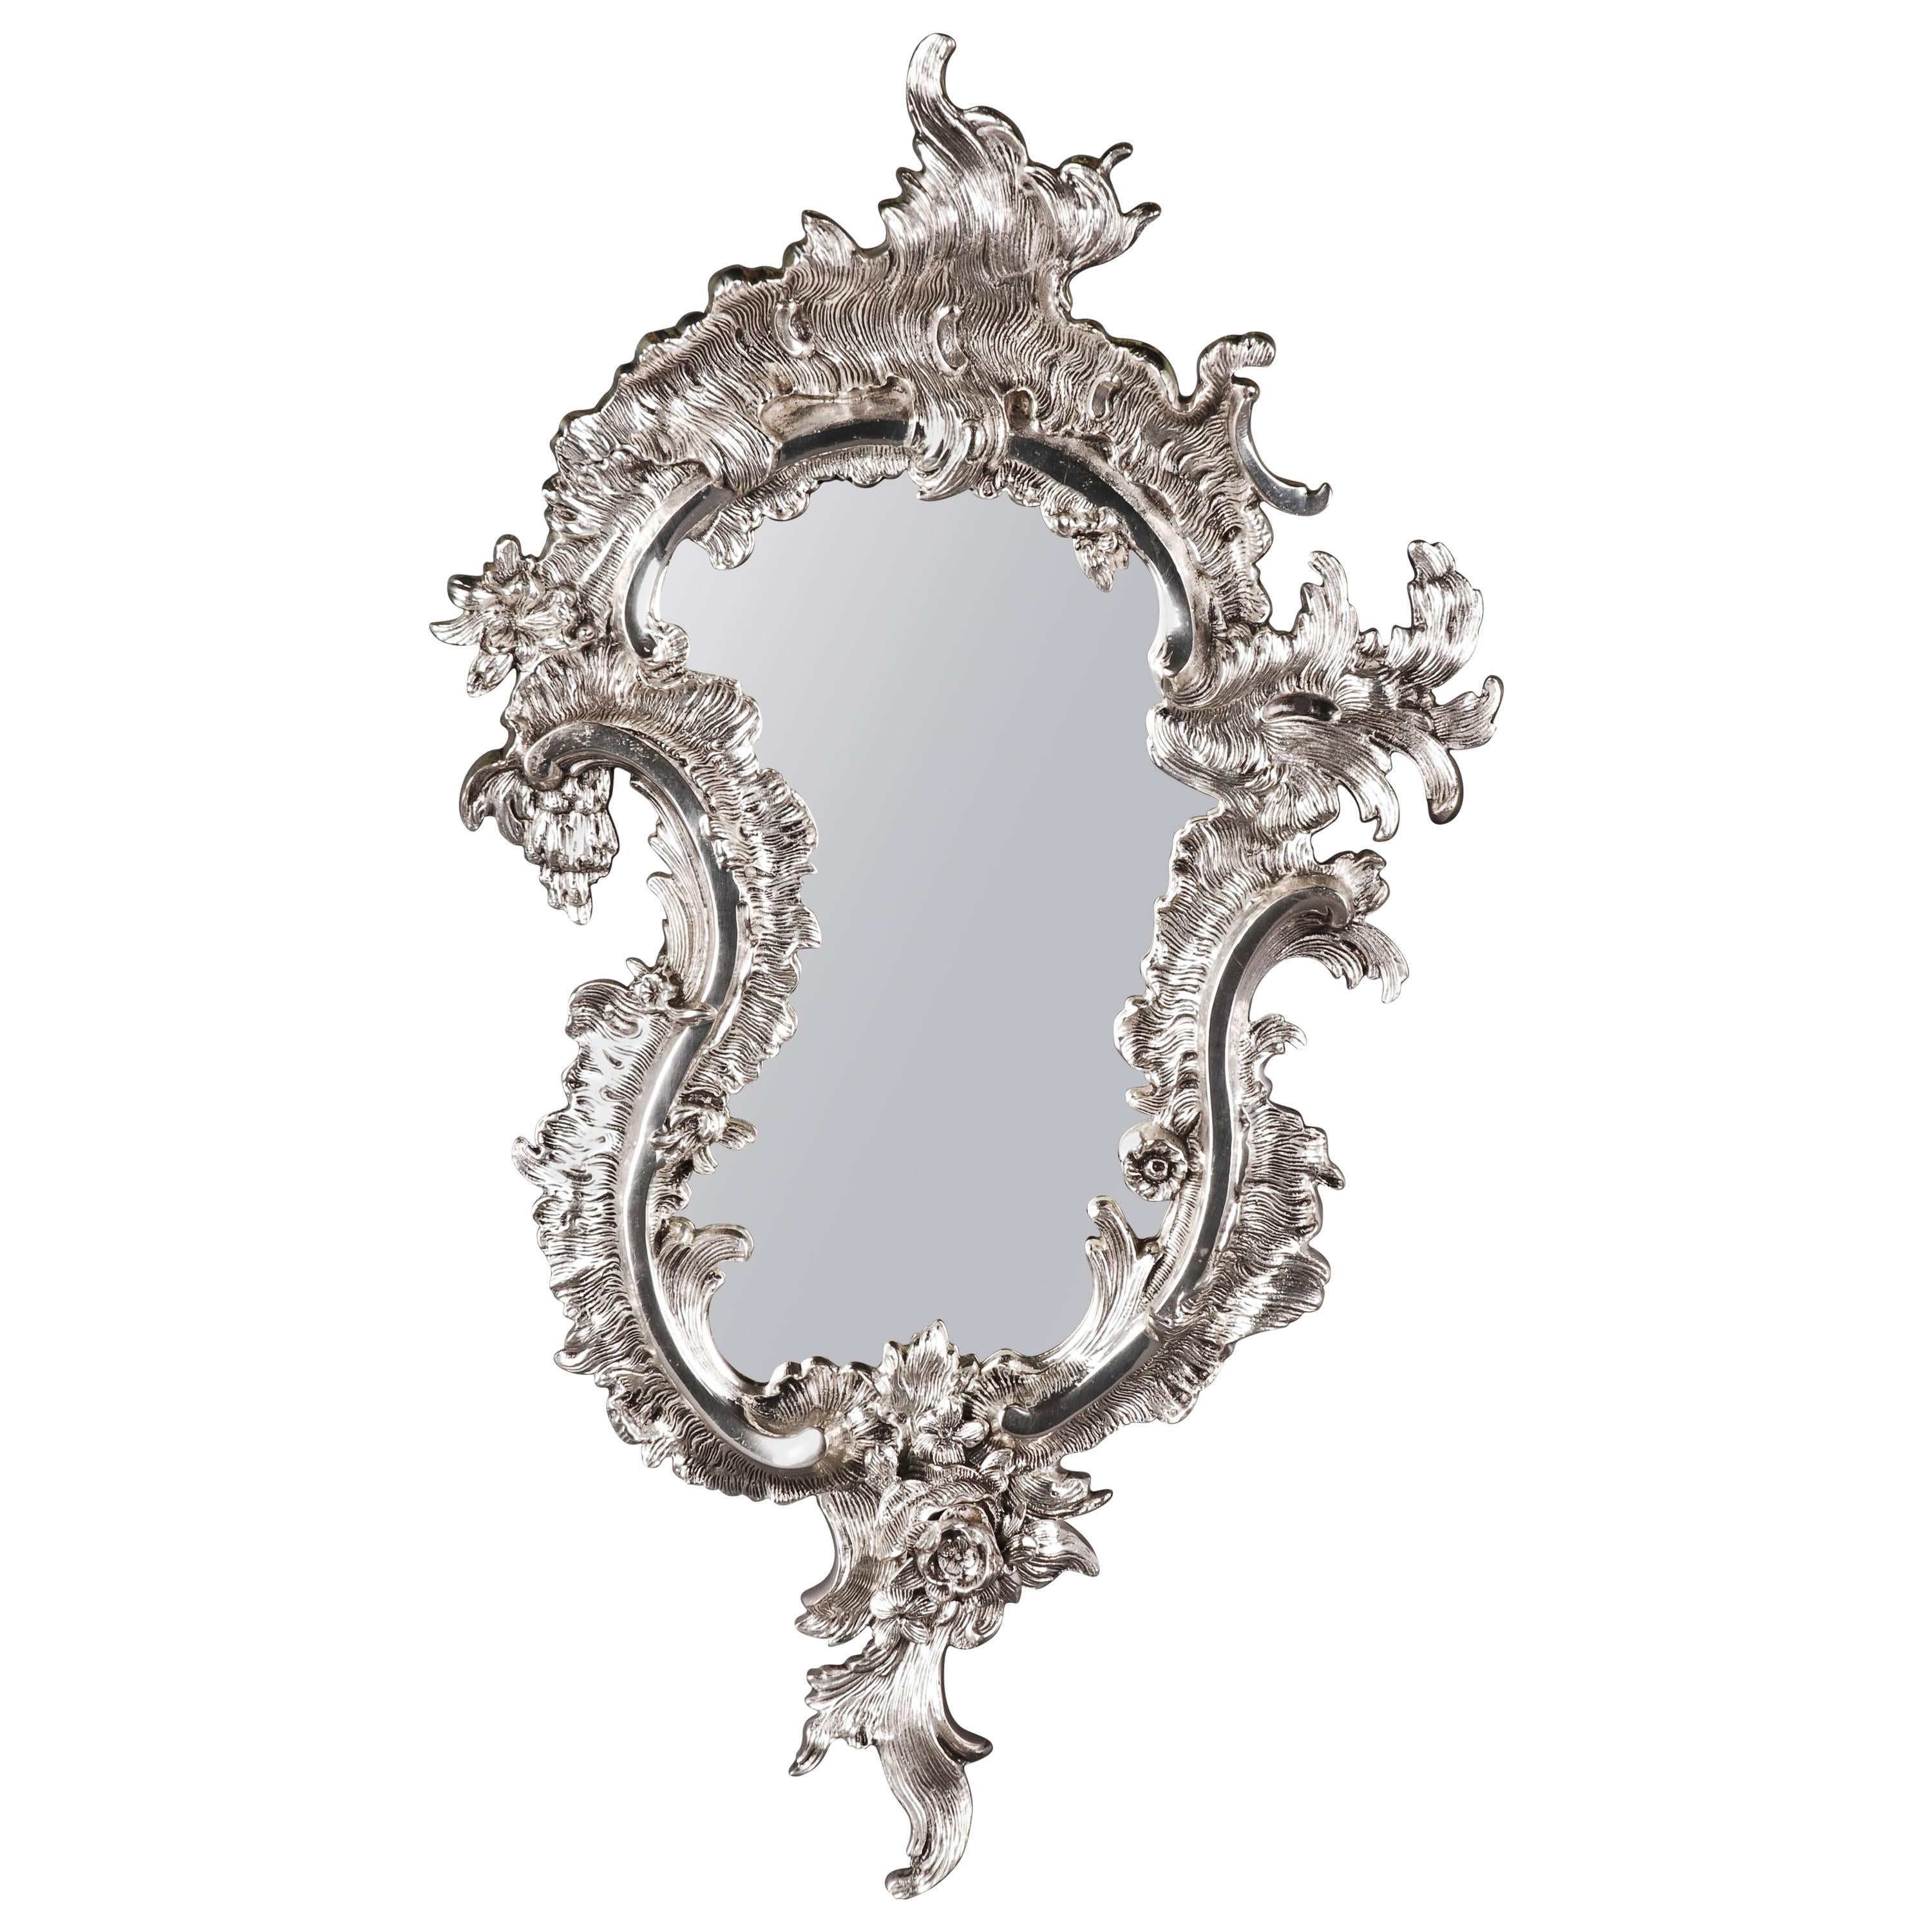 20th Century Rococo Style Silver-Gilded Wall Mirror For Sale